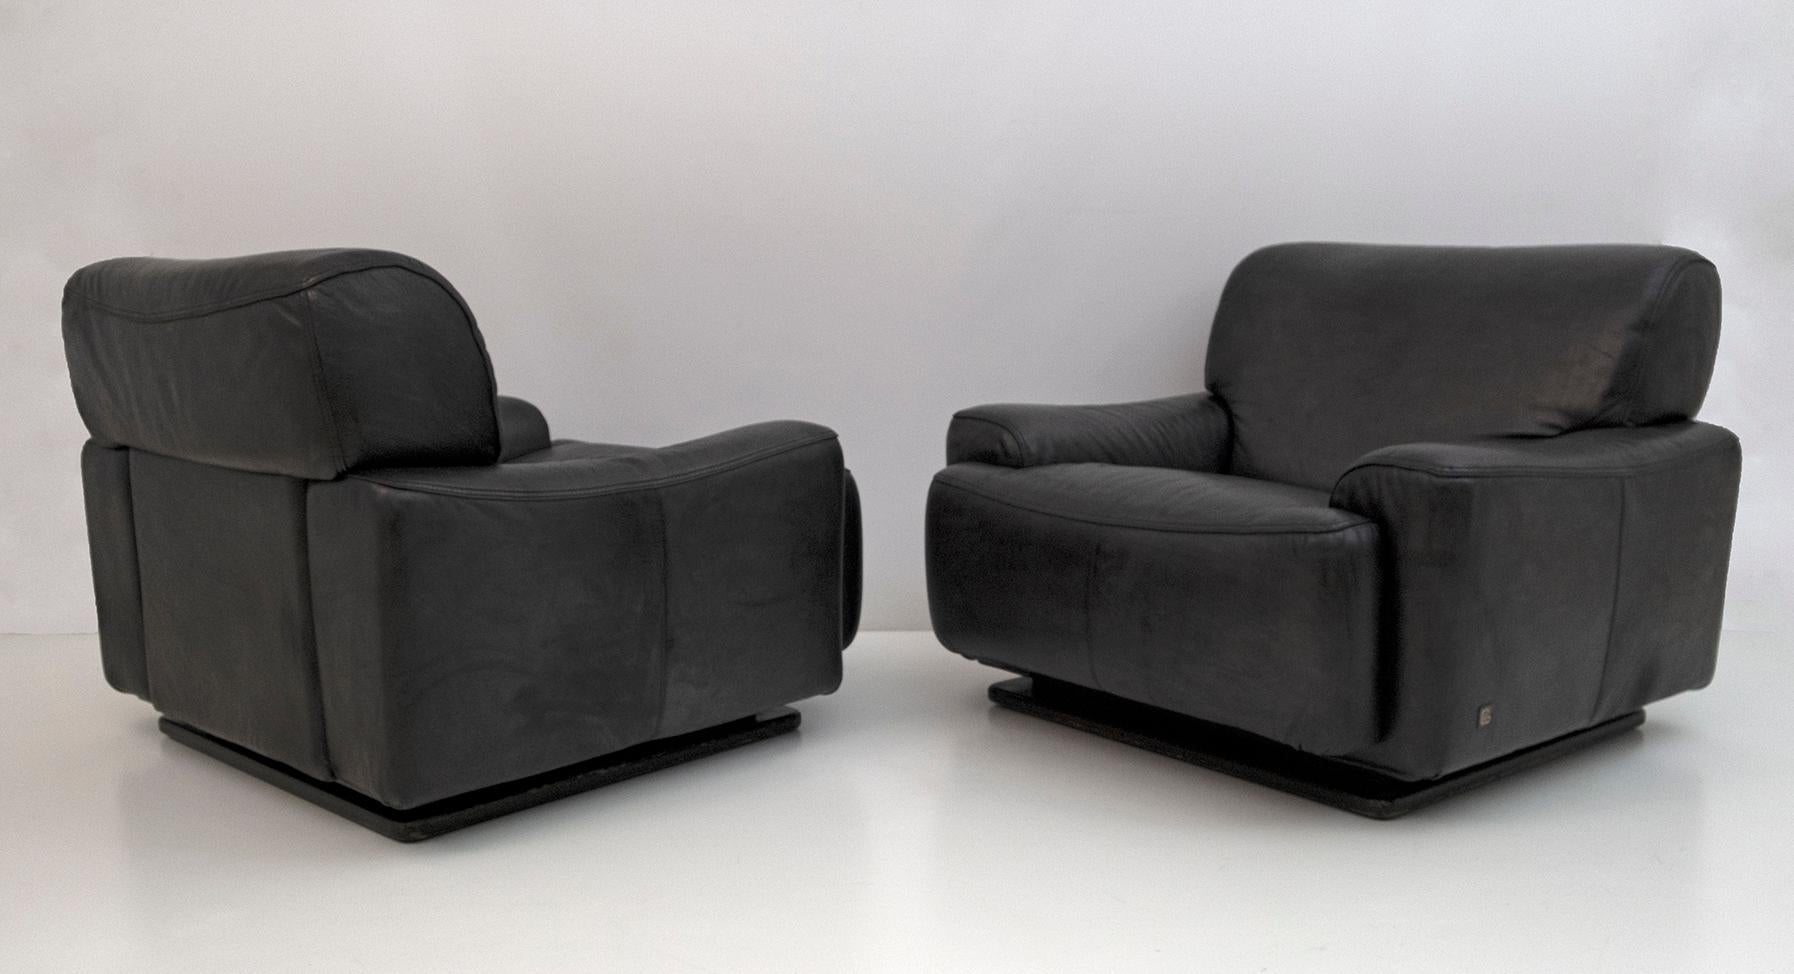 Pair of Piumotto armchairs produced by Busnelli, 1970s.
Upholstery in genuine smoked gray leather
Base in black lacquered wood.